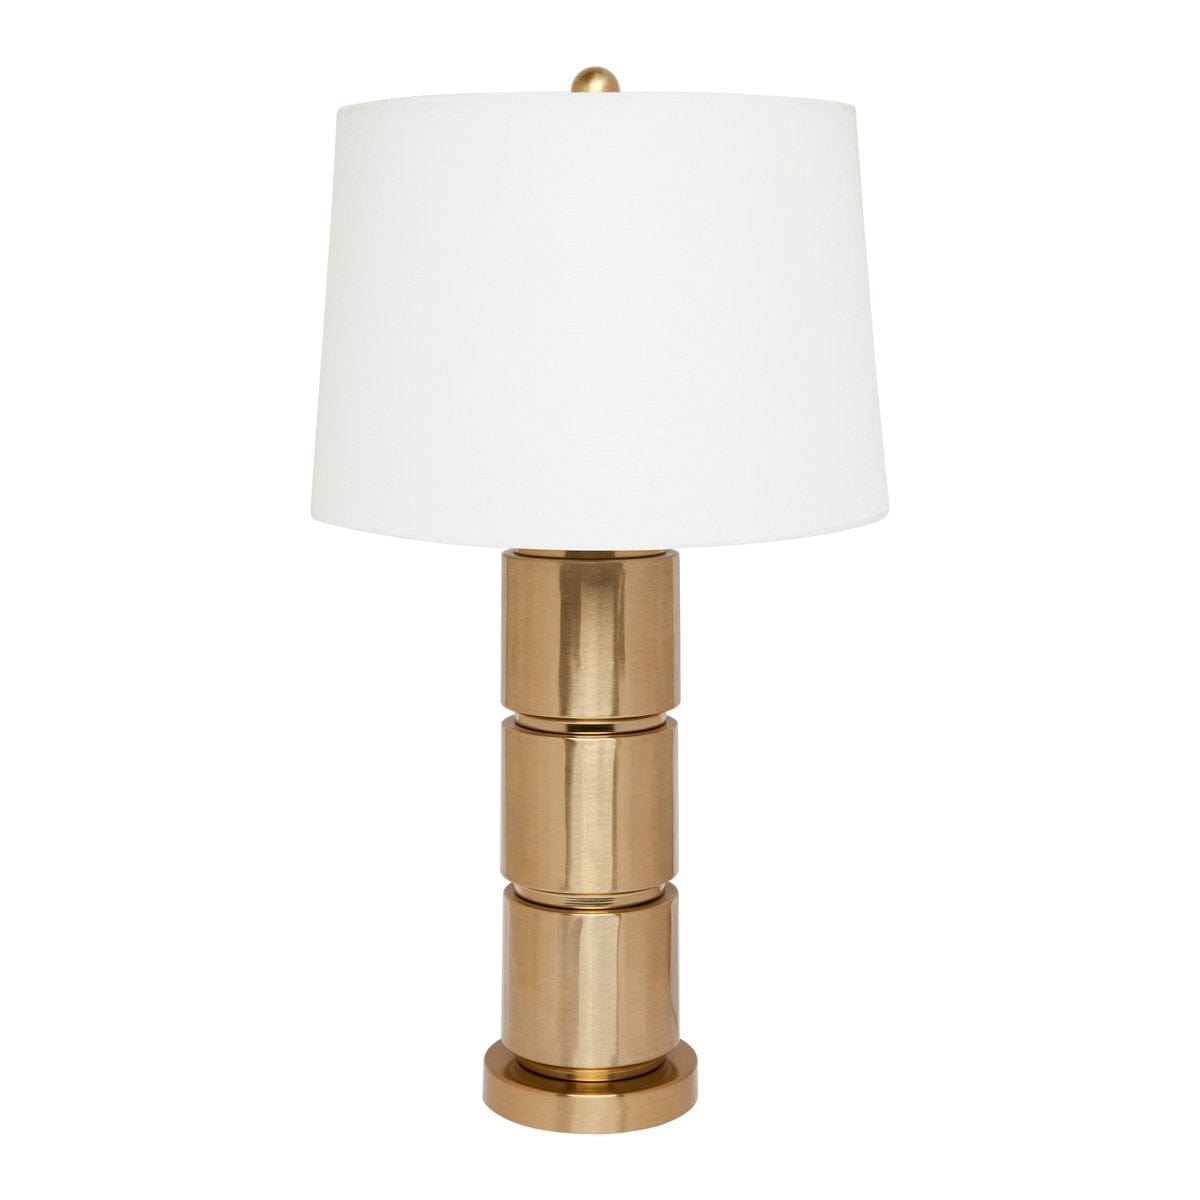 CAFE LIGHTING & LIVING Table Lamp Brixton Table Lamp 13325